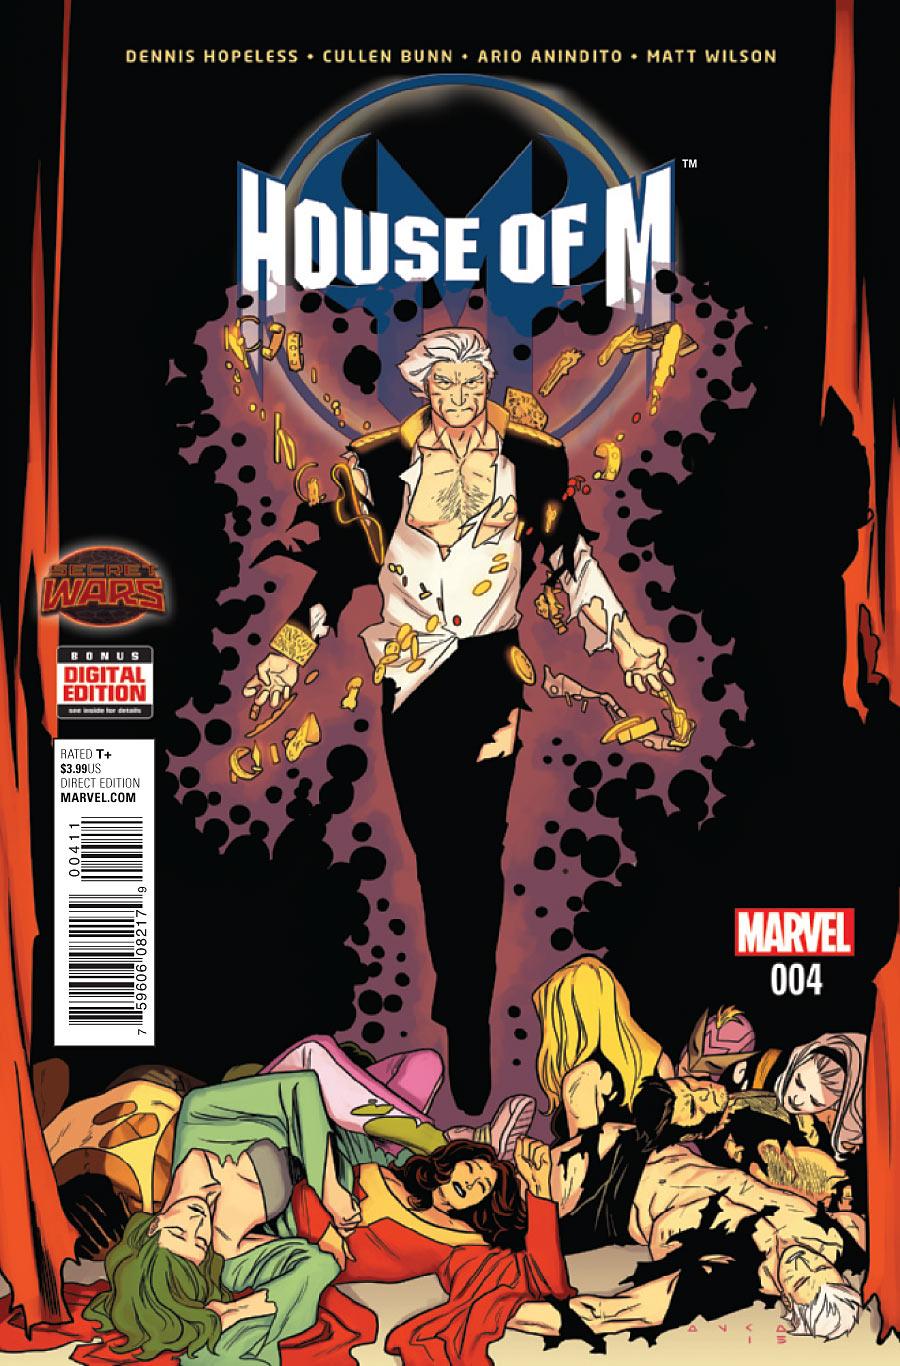 House of M Vol. 2 #4